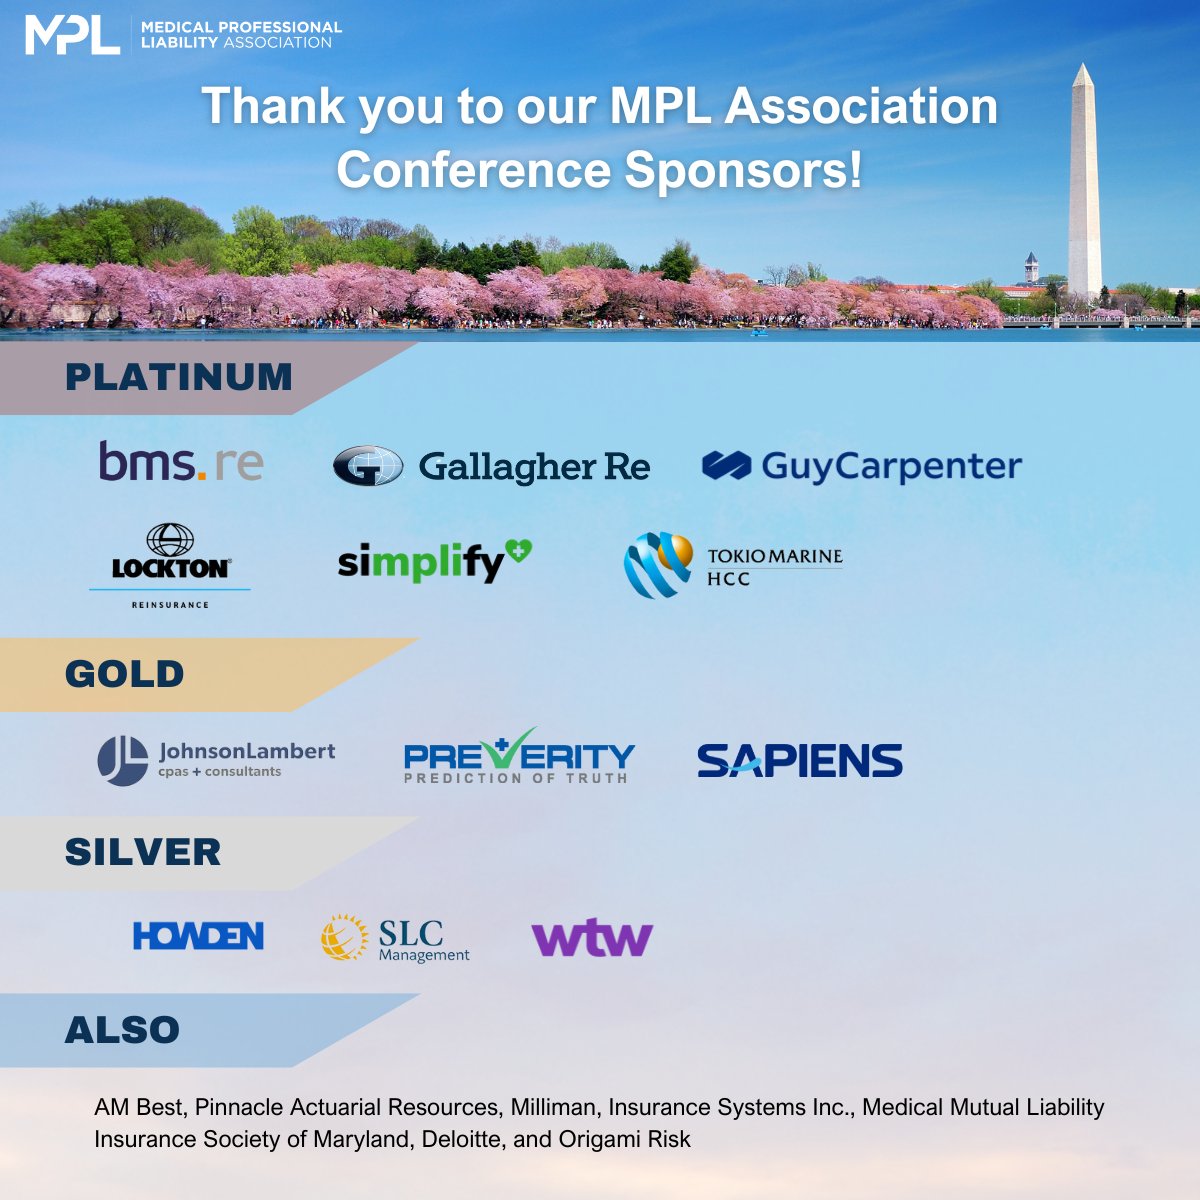 Thank you to our sponsors for their support of the MPL Association Conference—May 8-10 in Washington, D.C.! We are looking forward to seeing everyone next week.